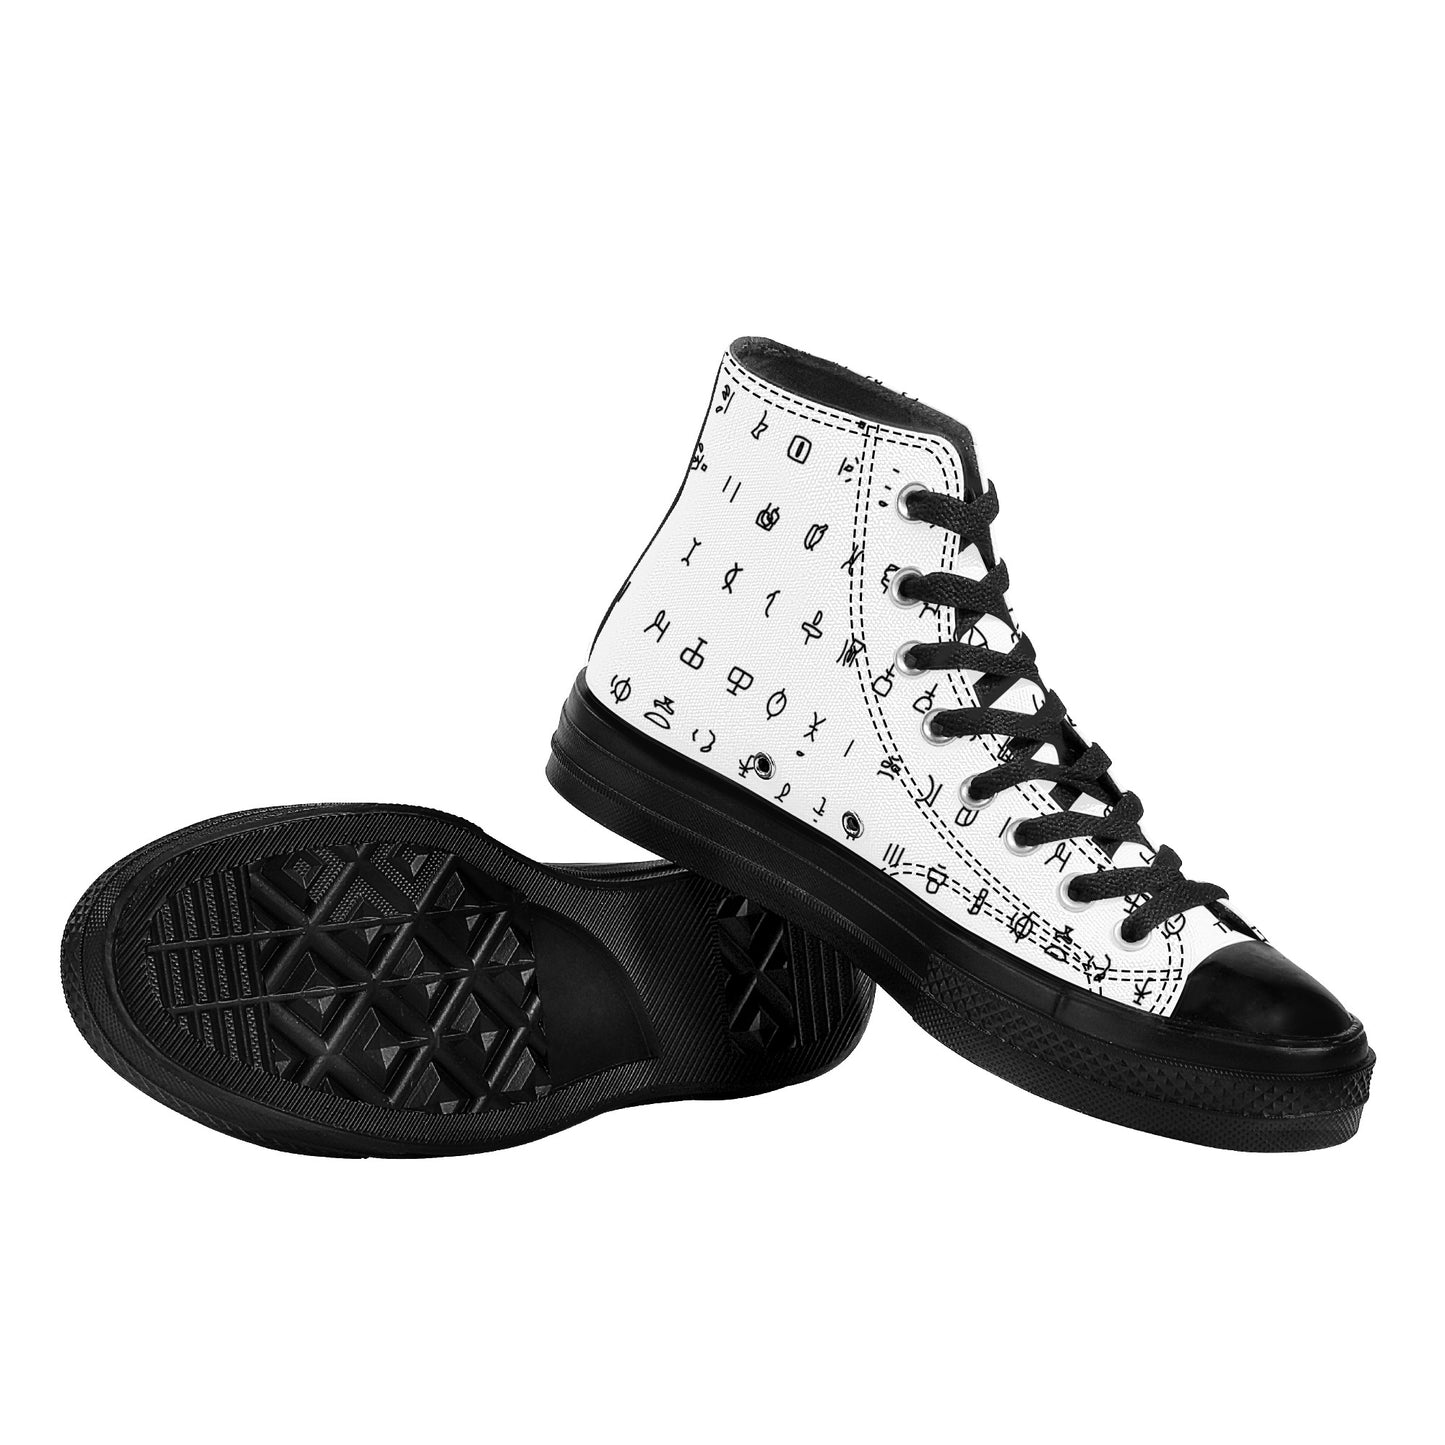 AZONTO TRADITION High Top Canvas Shoes - Black